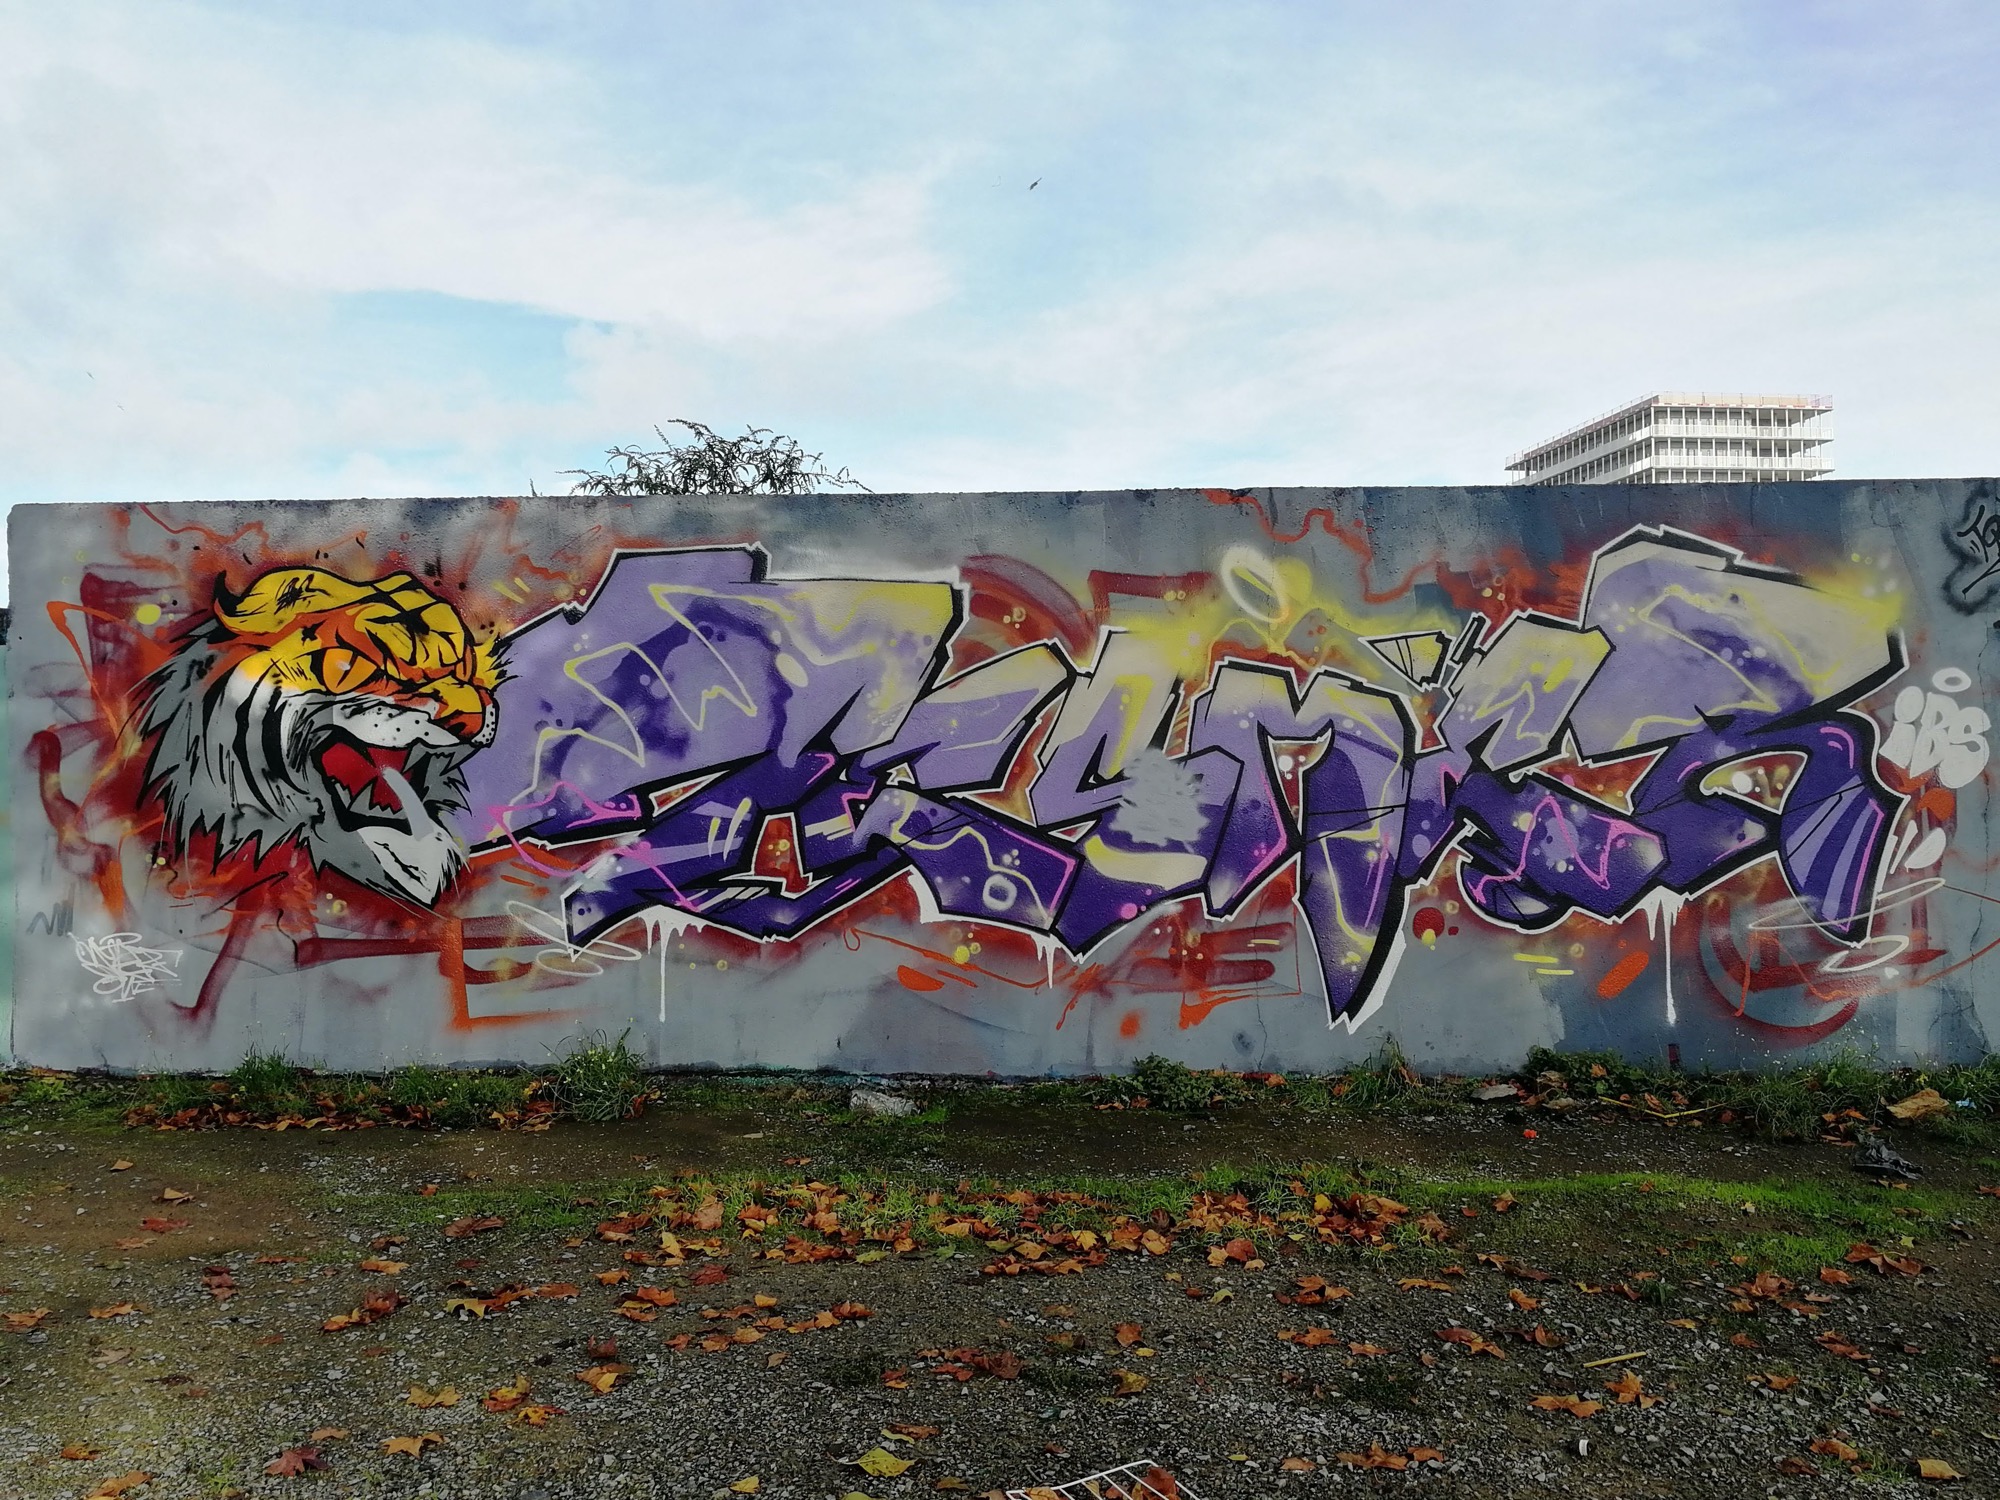 Graffiti 2991  captured by Rabot in Nantes France